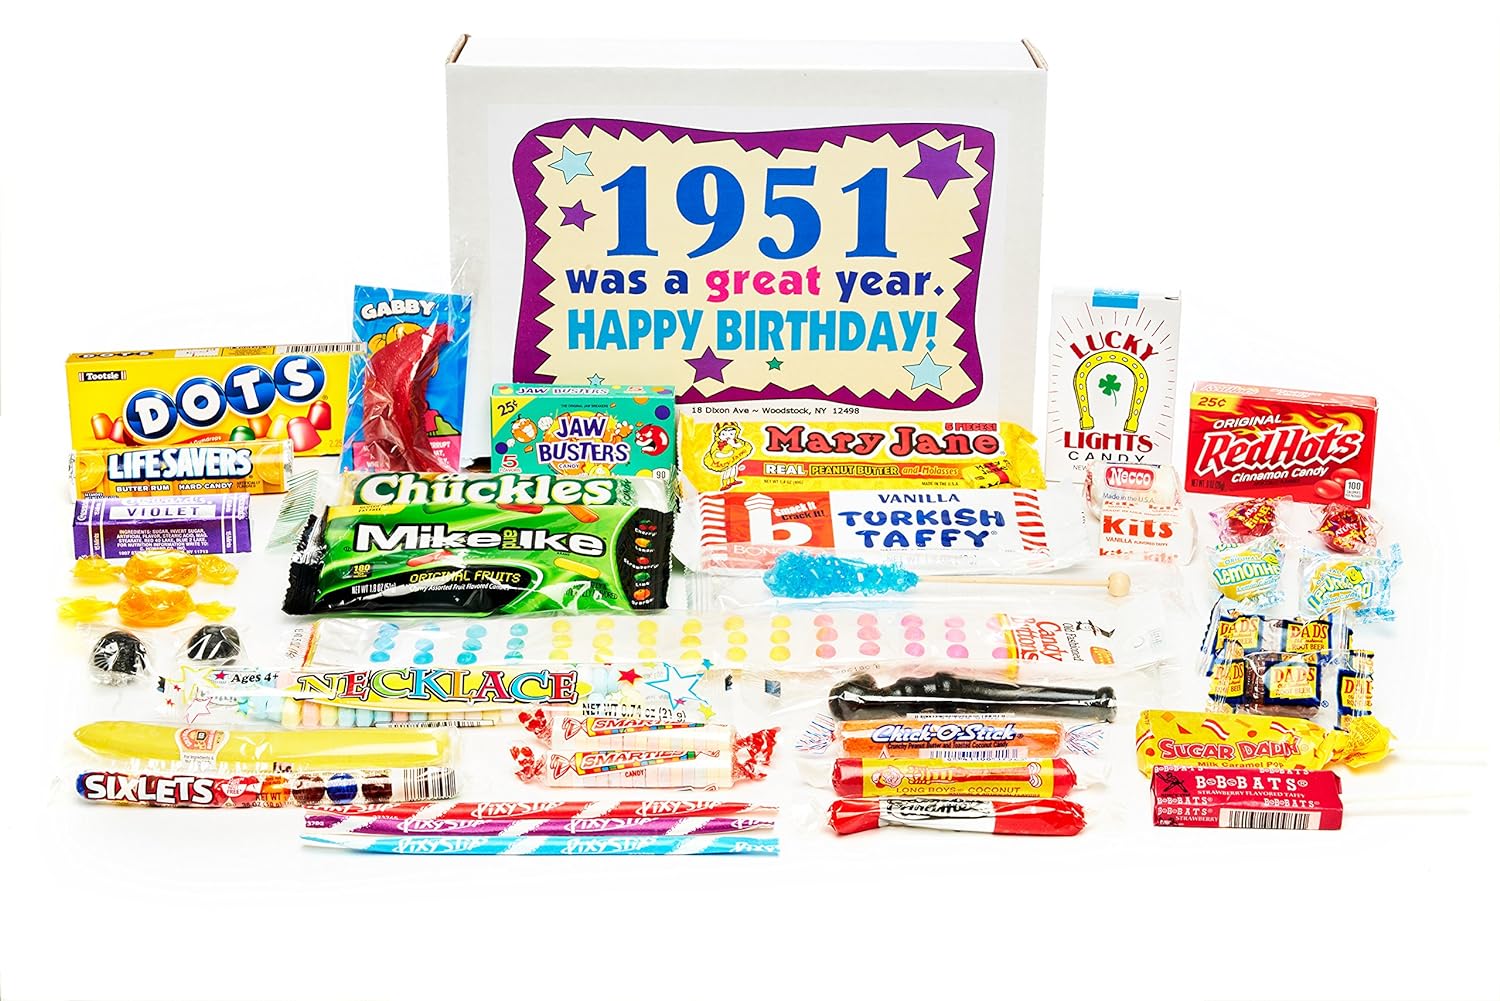 Woodstock Candy 1951 69th Birthday Box Nostalgic Retro Candy Mix from Childhood for 69 Year Old Man or Woman Born 1951 Jr